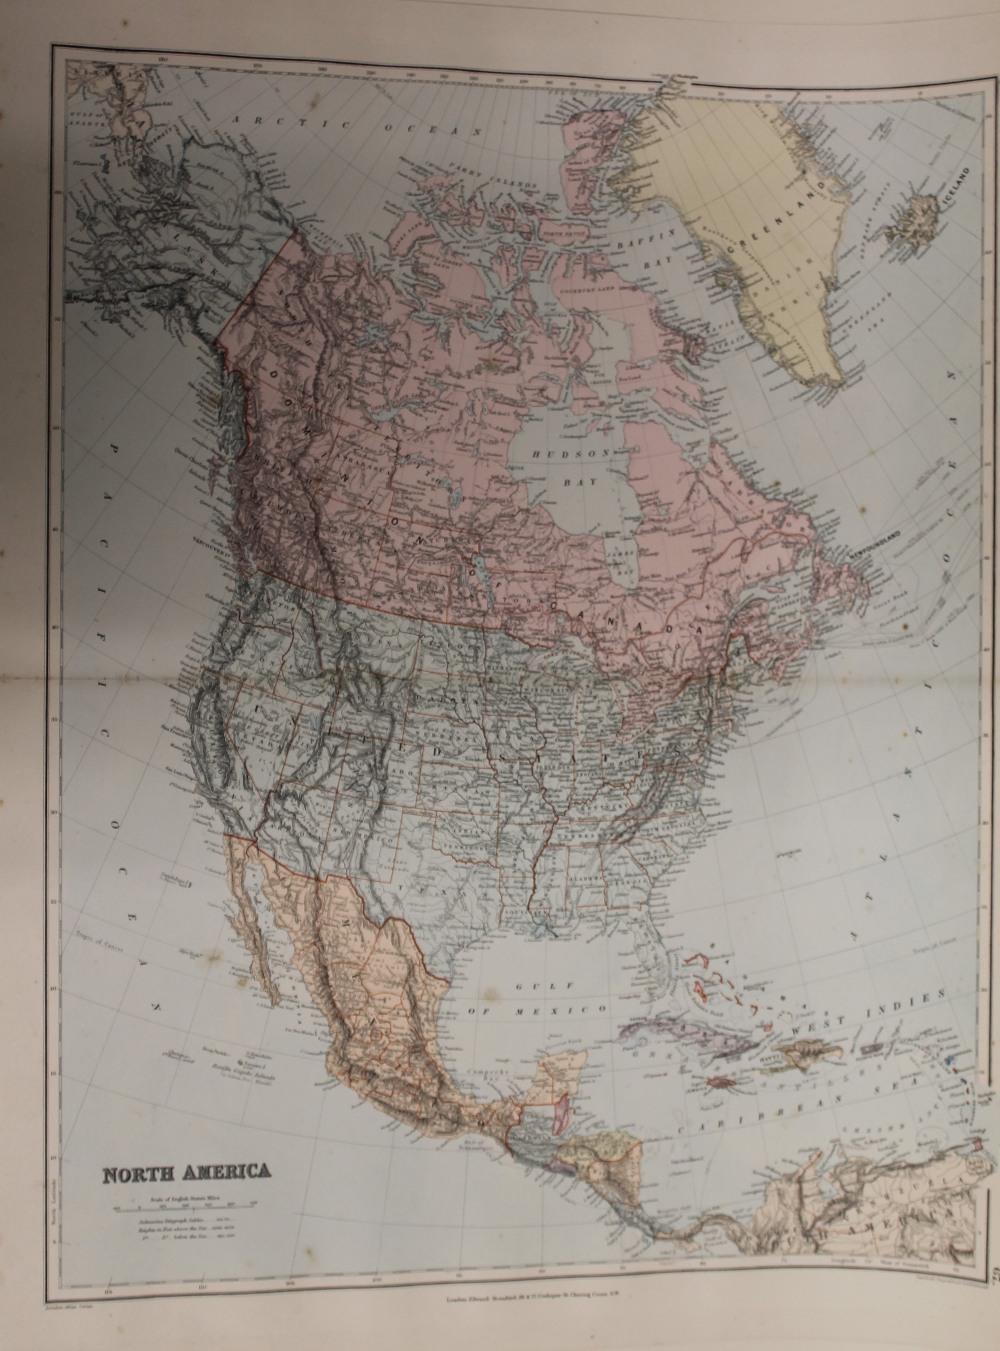 A collection of maps of North America from Stanford's London Folio Atlas - Image 2 of 5